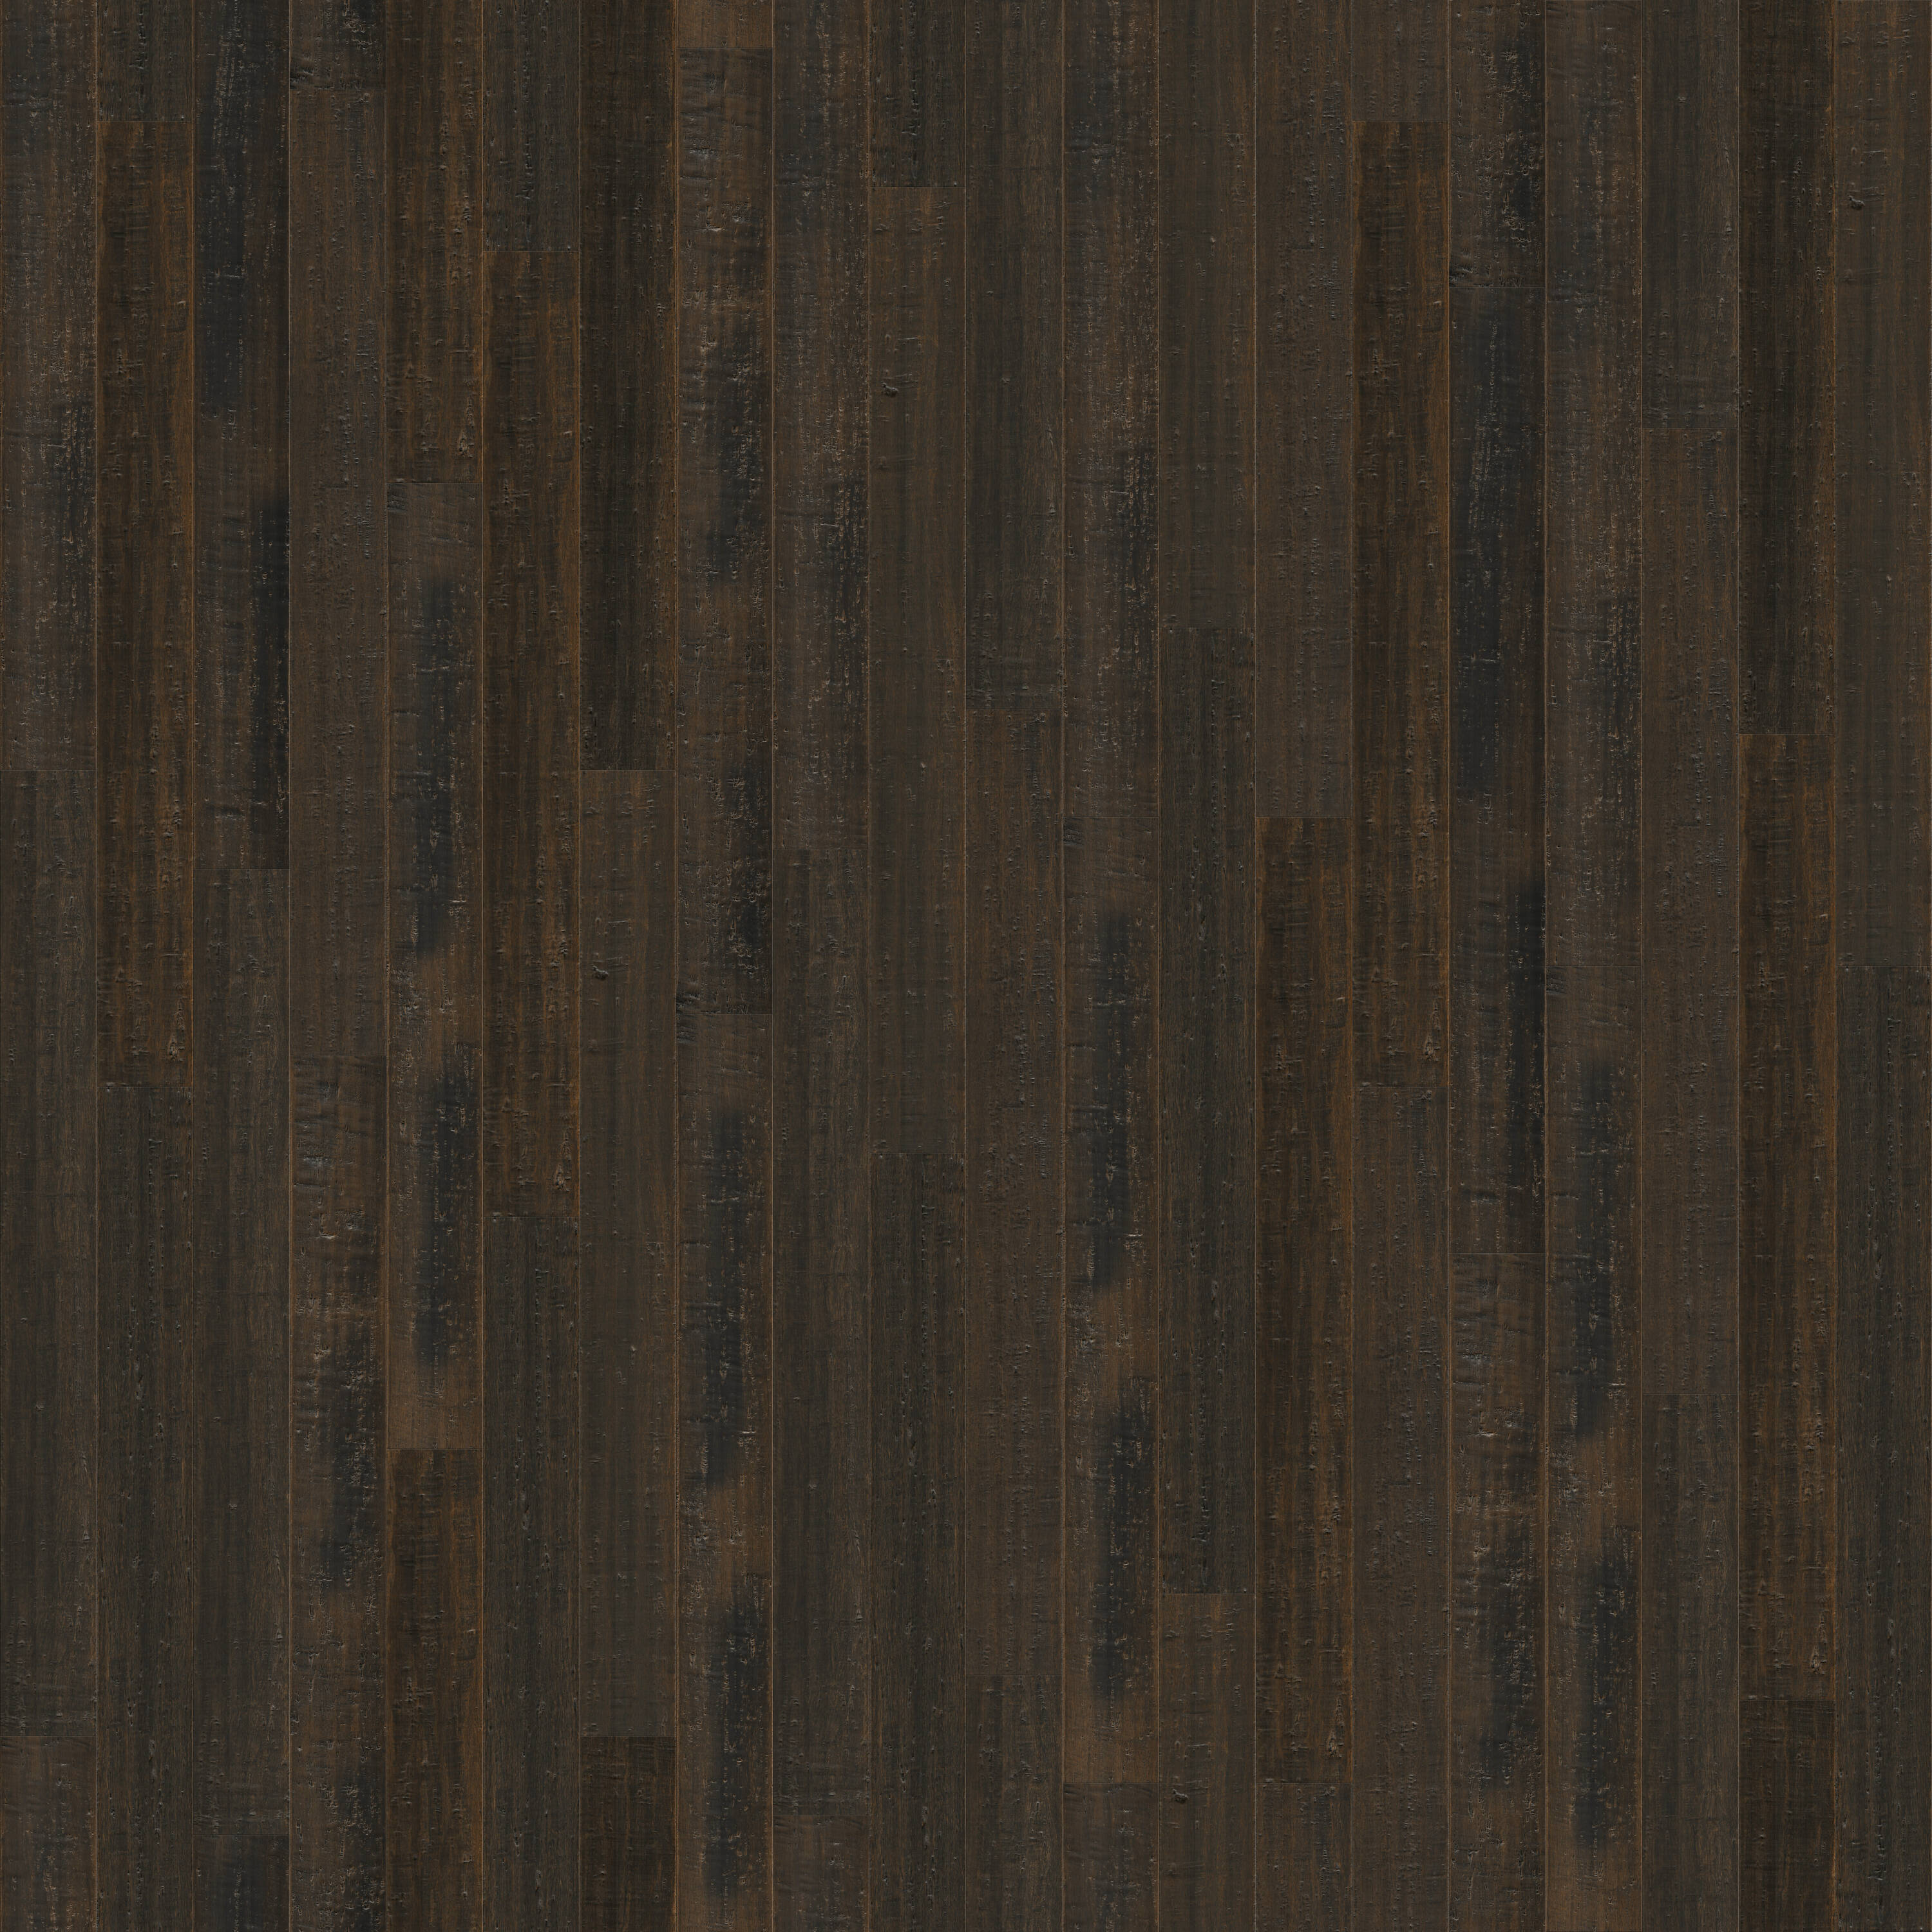 (Sample) Fossilized Vintage Port Bamboo 1/2-in solid Hardwood Flooring in Brown | - Cali Bamboo 7001009107